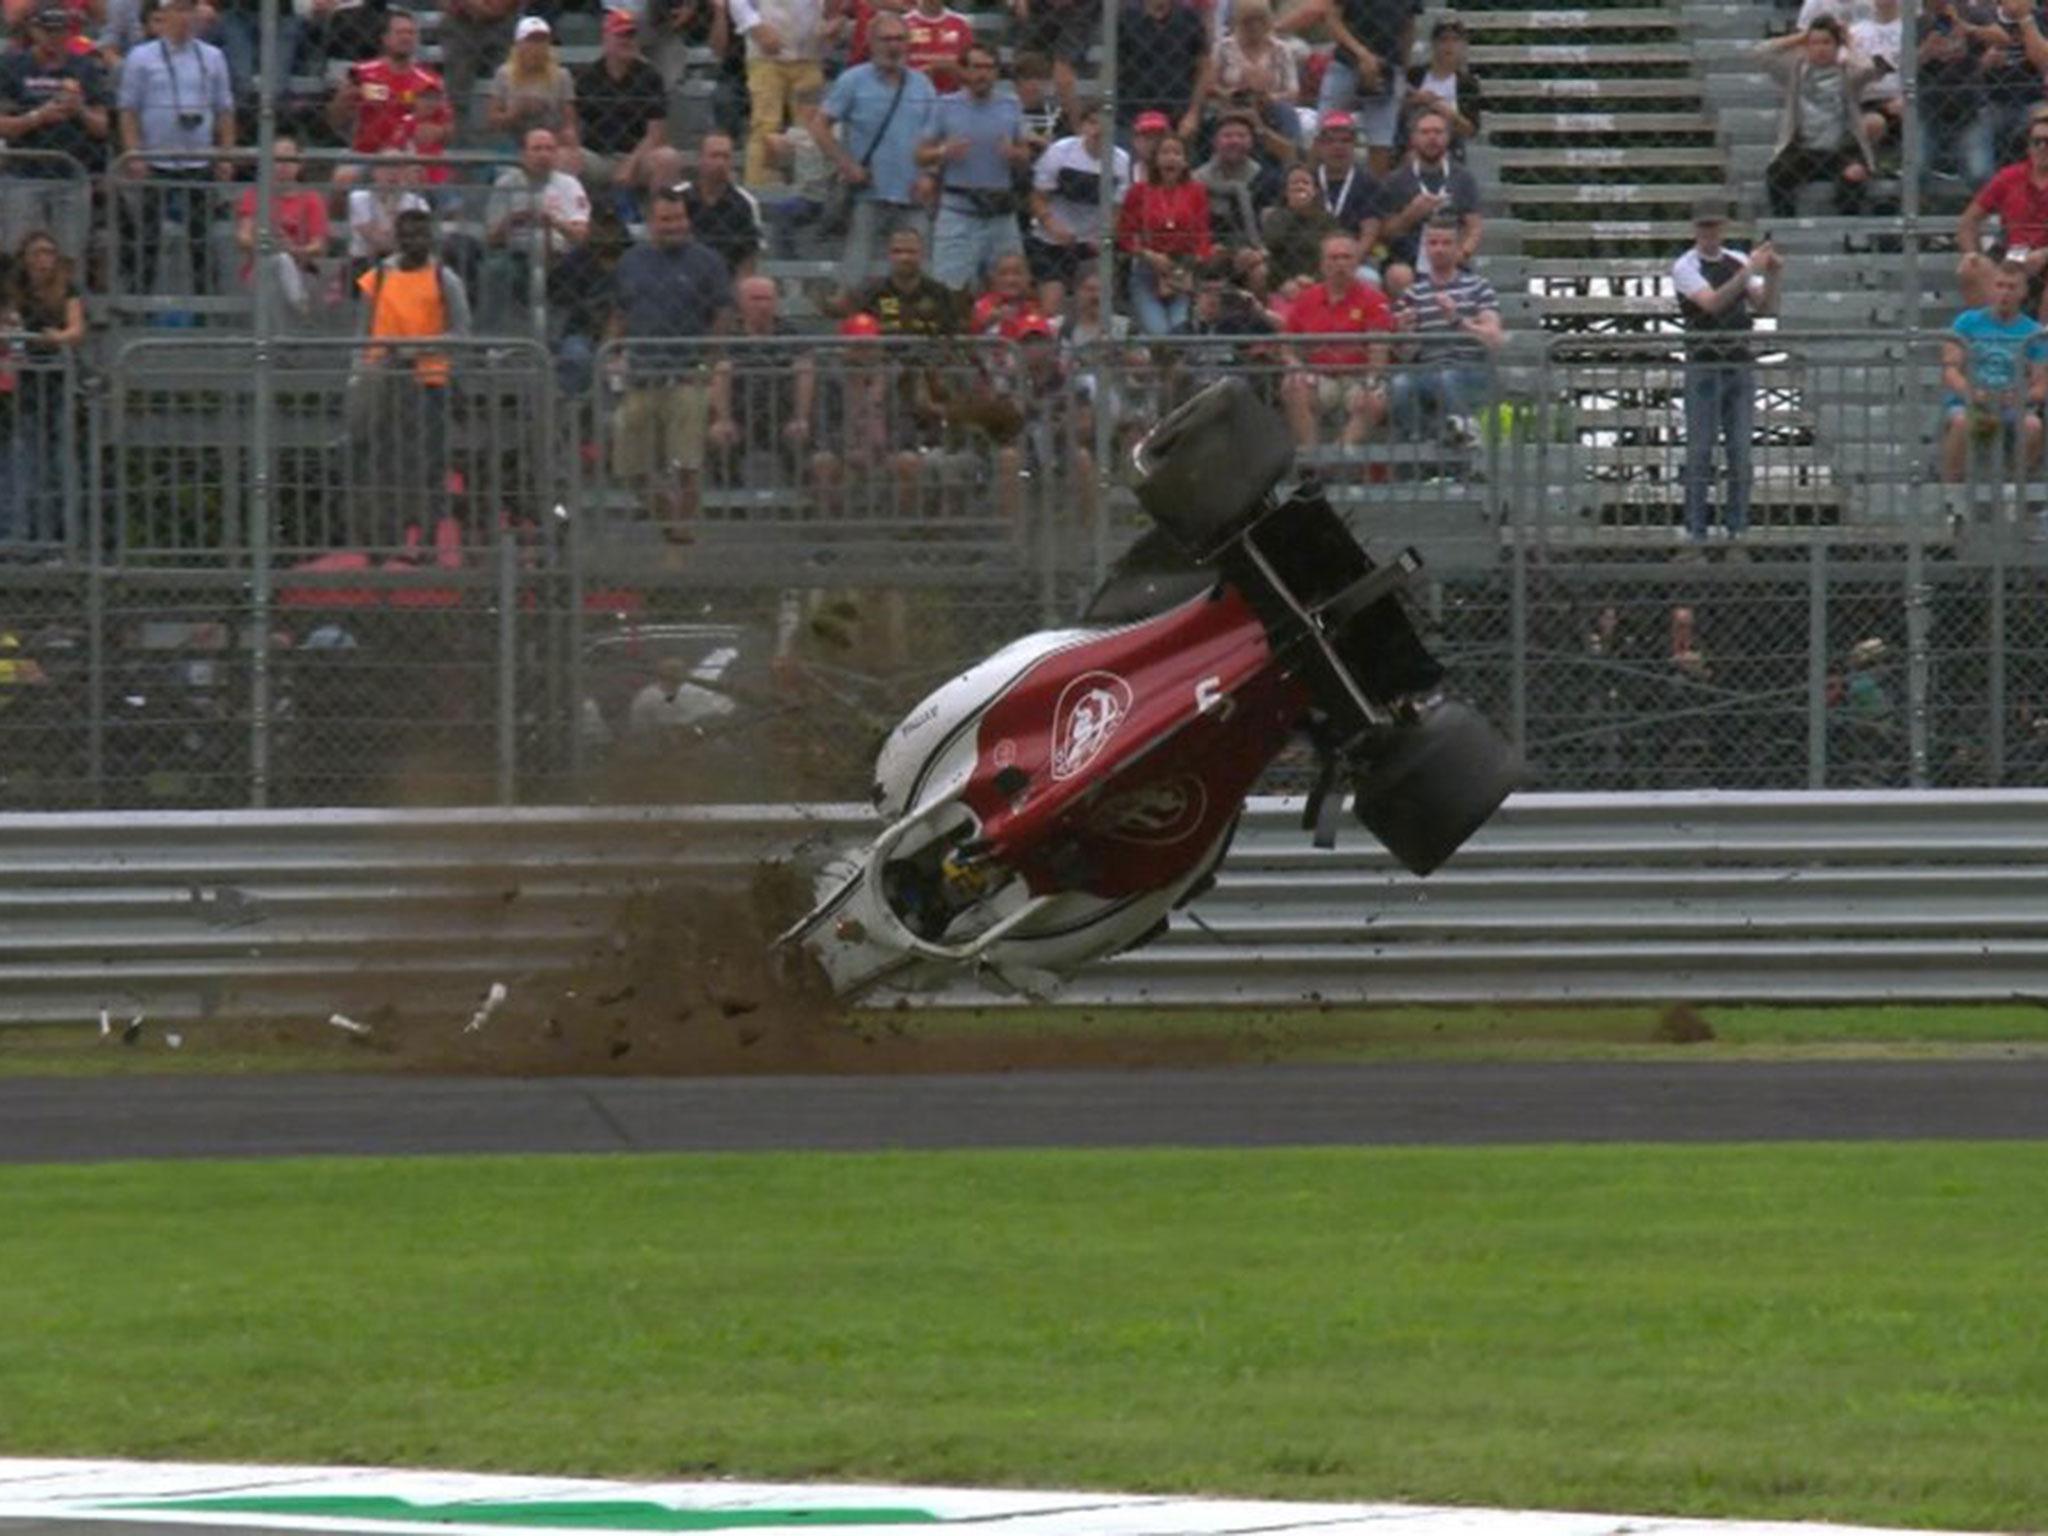 Marcus Ericsson walked away from a scary crash during Italian Grand Prix practice